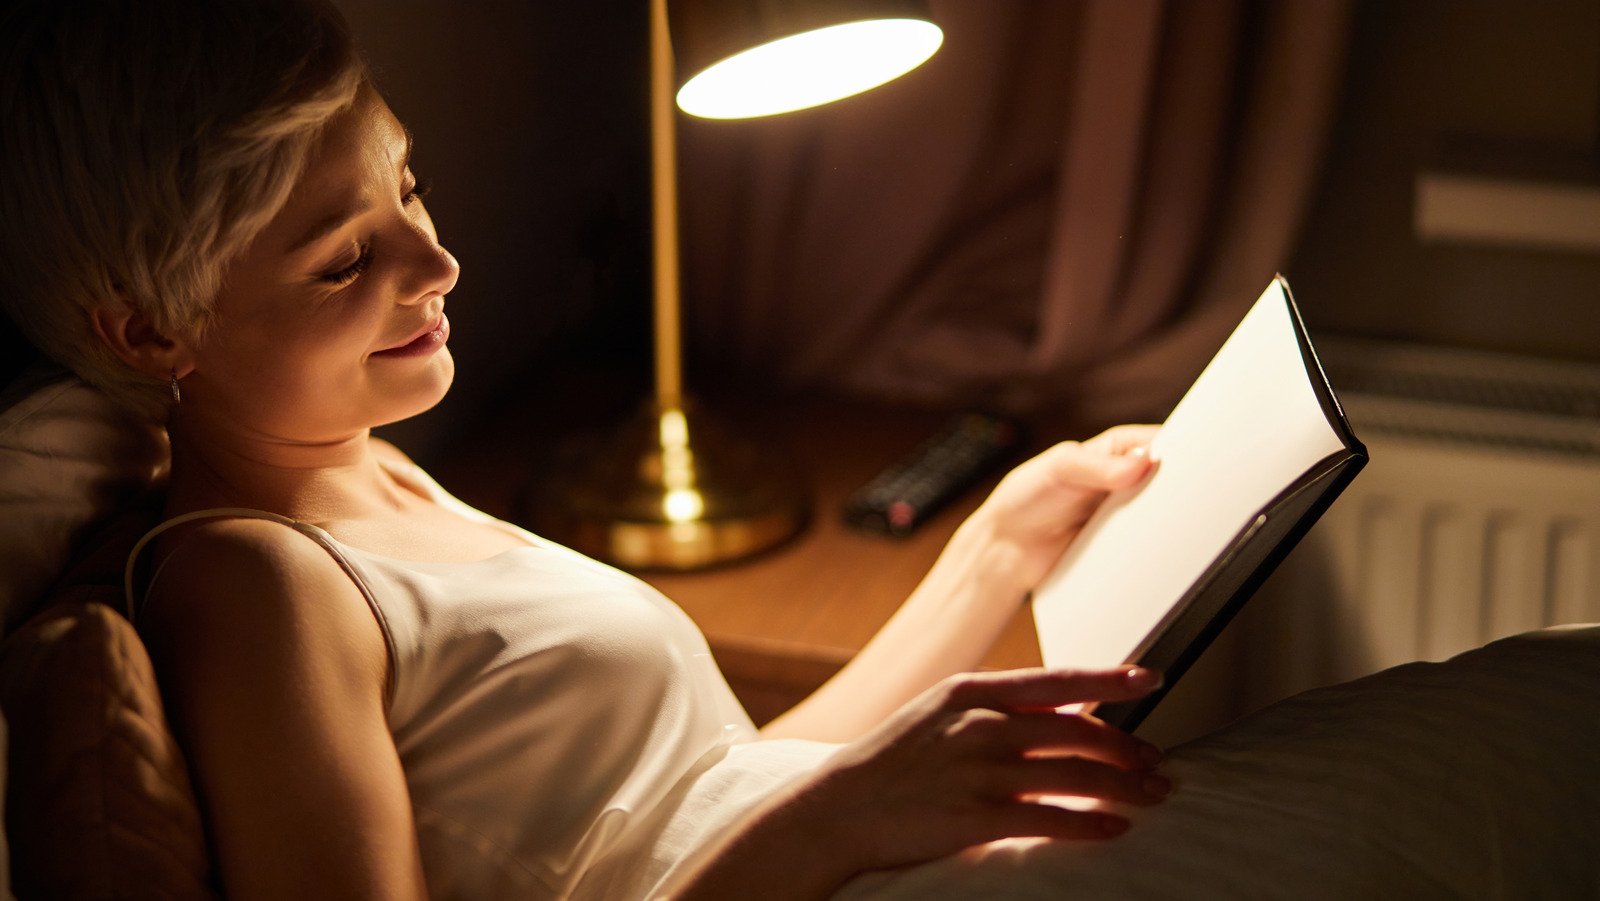 The Reason You Should Avoid Reading In Bed Before Sleeping